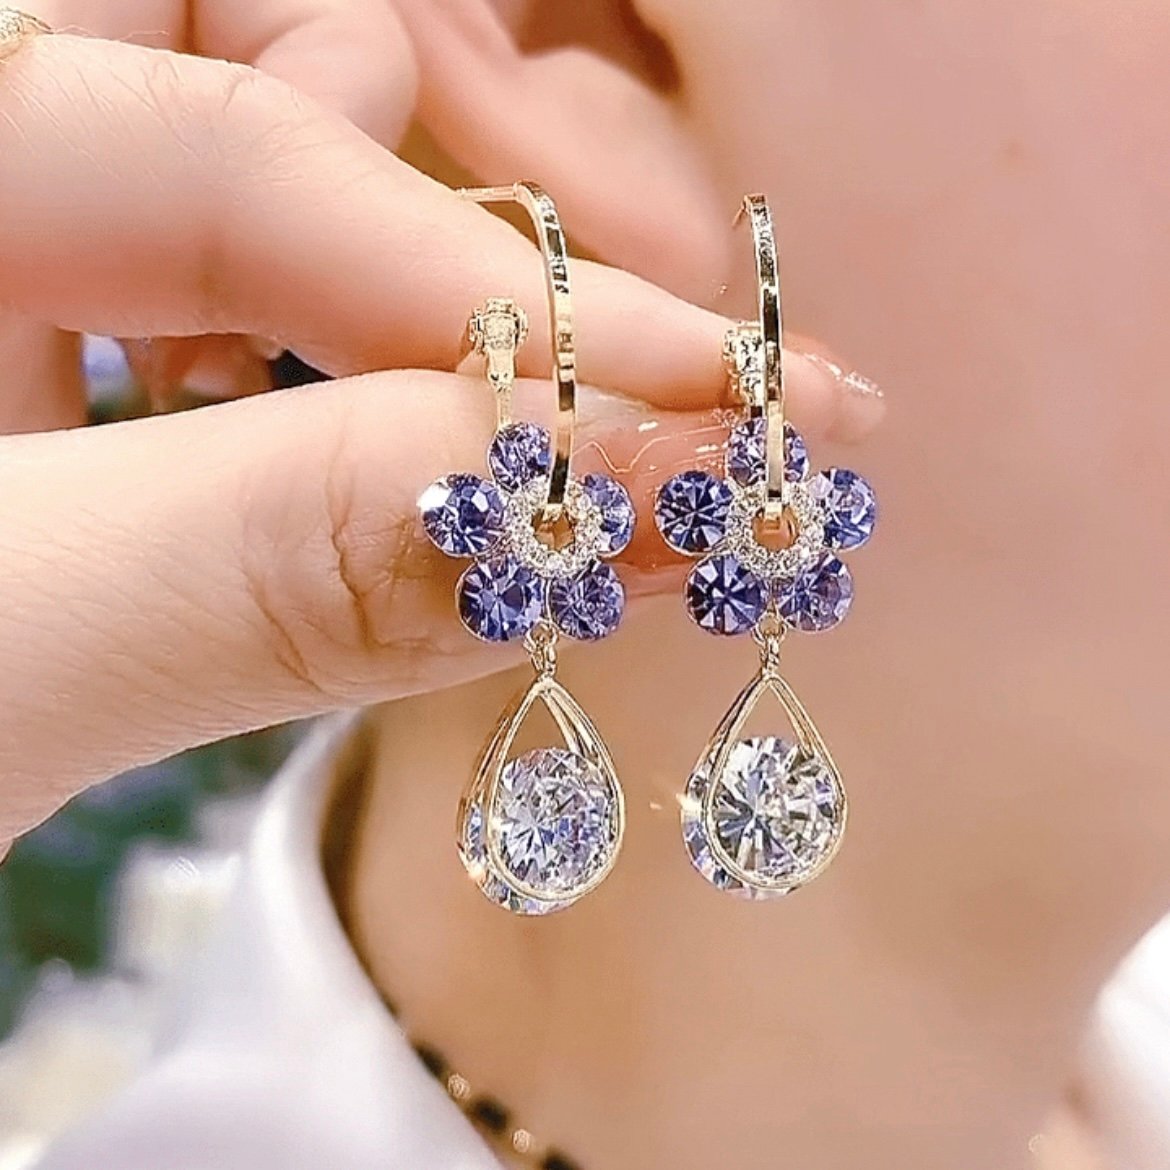 (⏰LAST DAY SALE--49% OFF)Fashion Flower Crystal Earrings-Buy 2 Get 1 Free Today